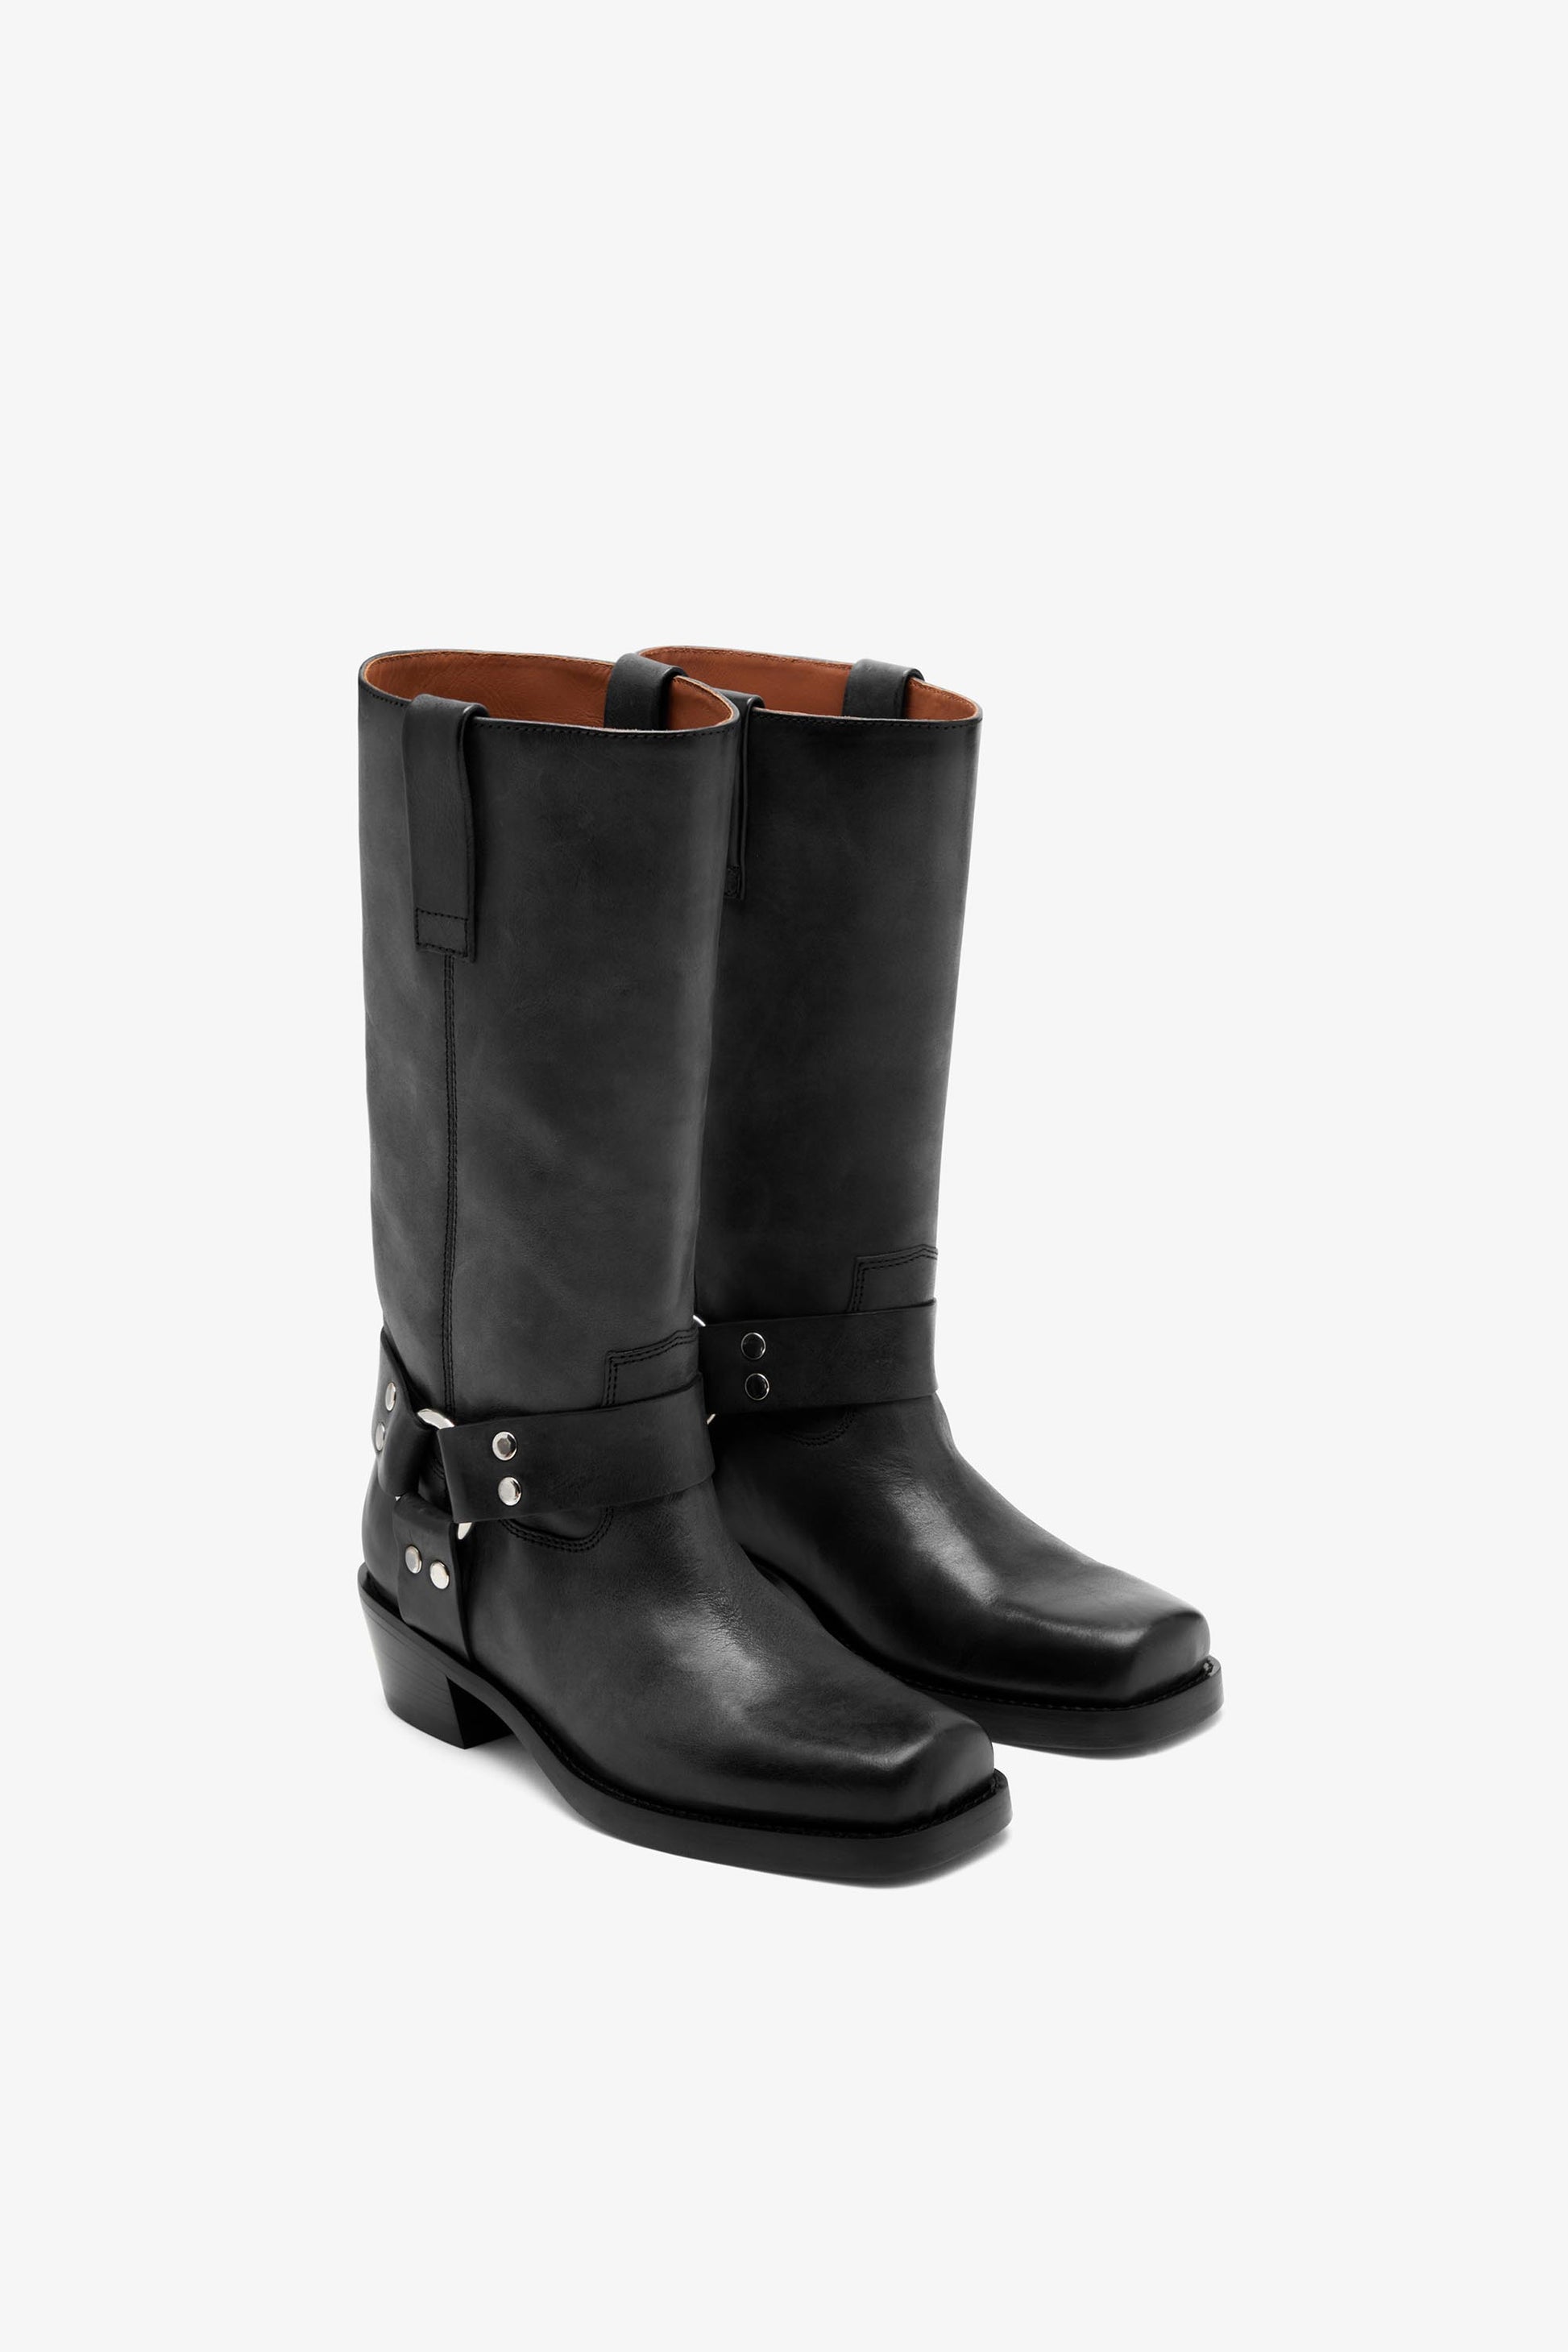 Black nappa leather boots with smoky nuances